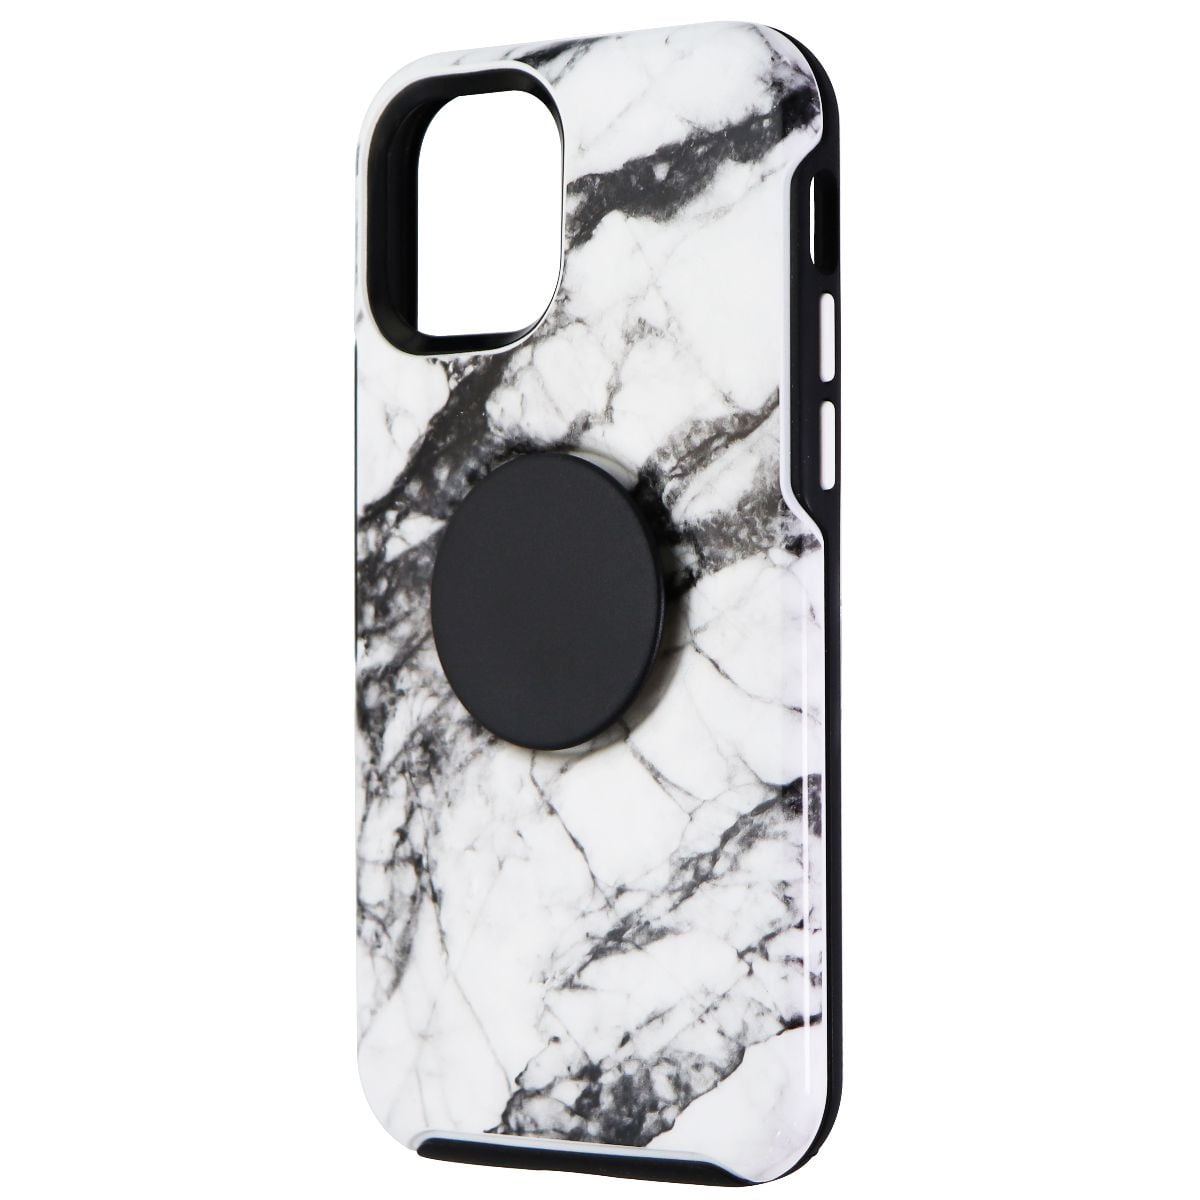 Otter + Pop Symmetry Series Case for iPhone 12 & 12 Pro - White Marble